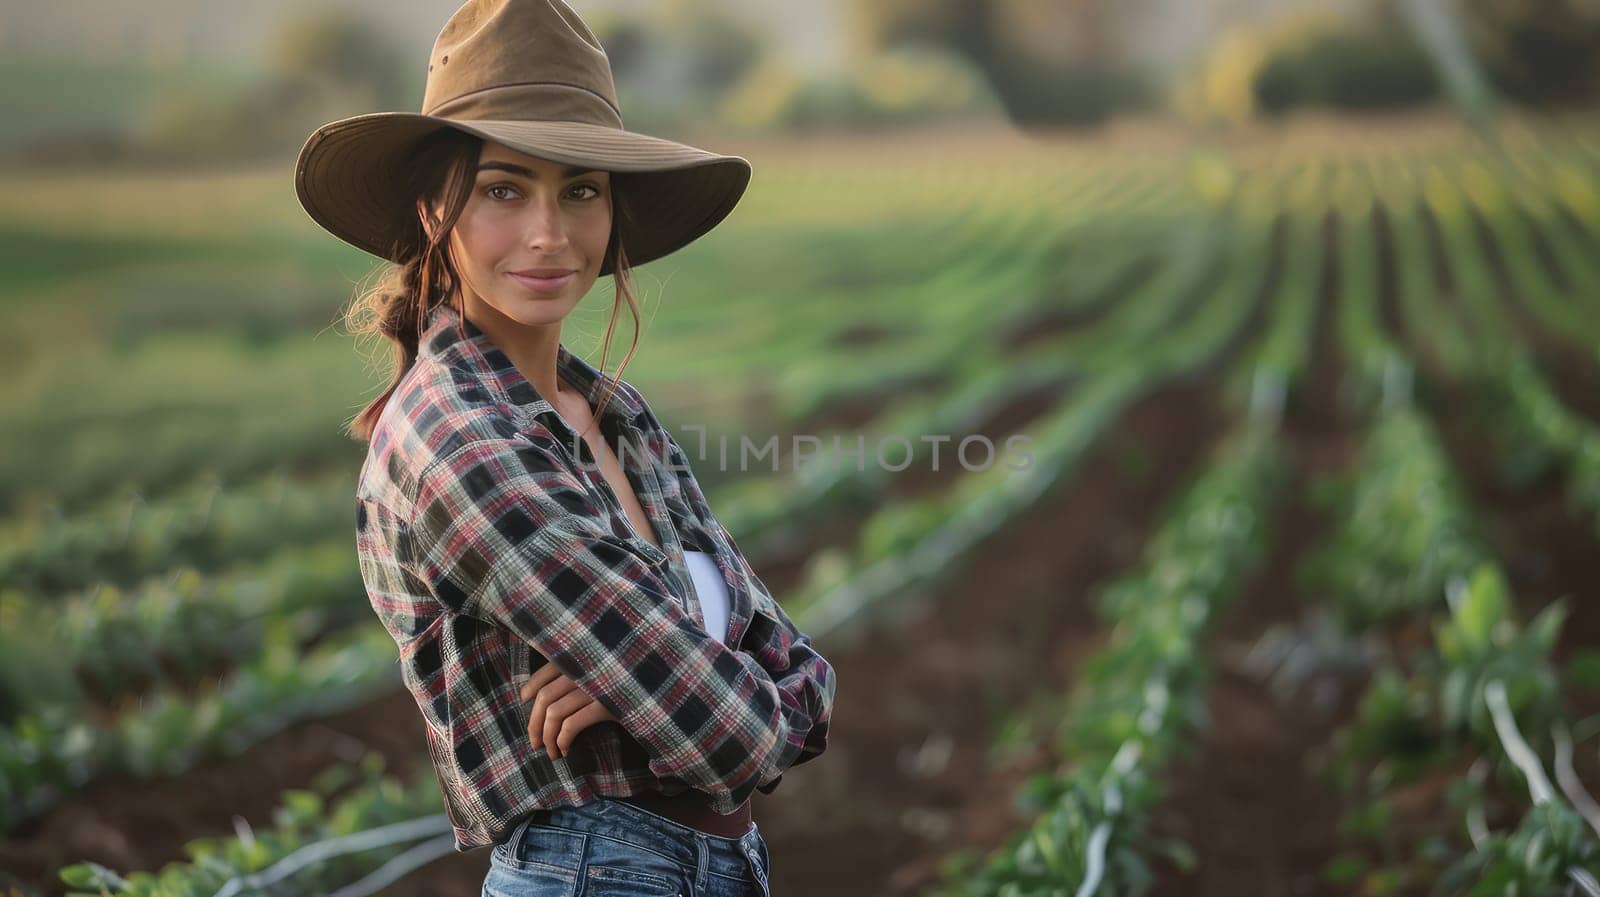 Woman farmer with vegetables in the field. Selective focus. Nature.